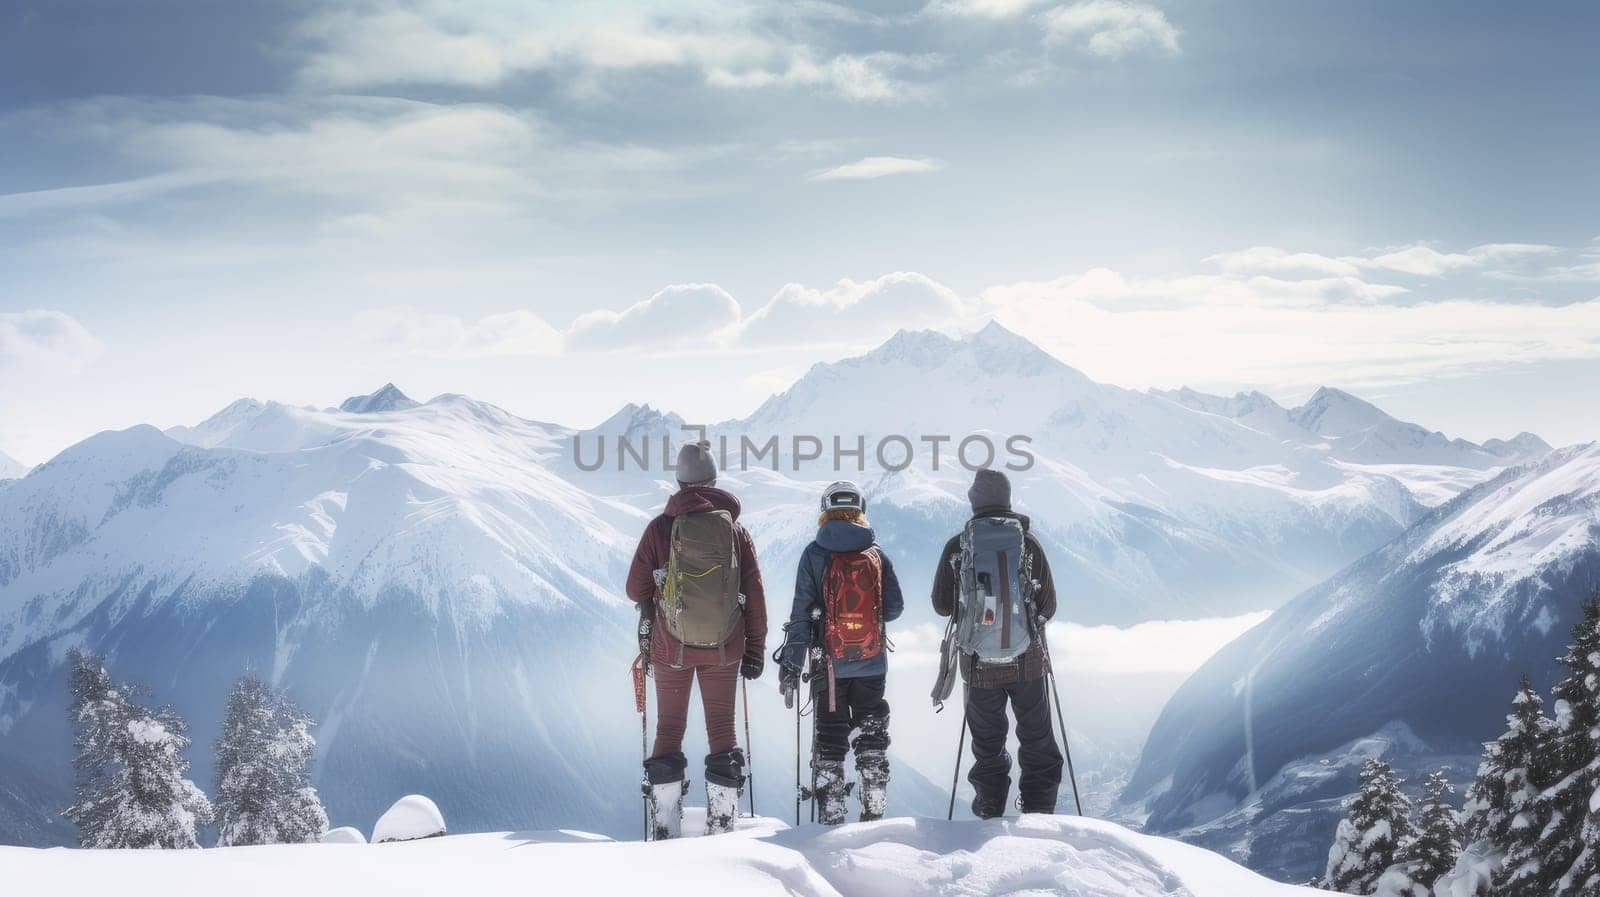 A family of skiers looks at the snow-capped mountains at a ski resort, during vacation and winter holidays. Concept of traveling around the world, recreation, winter sports, vacations, tourism in the mountains and unusual places.